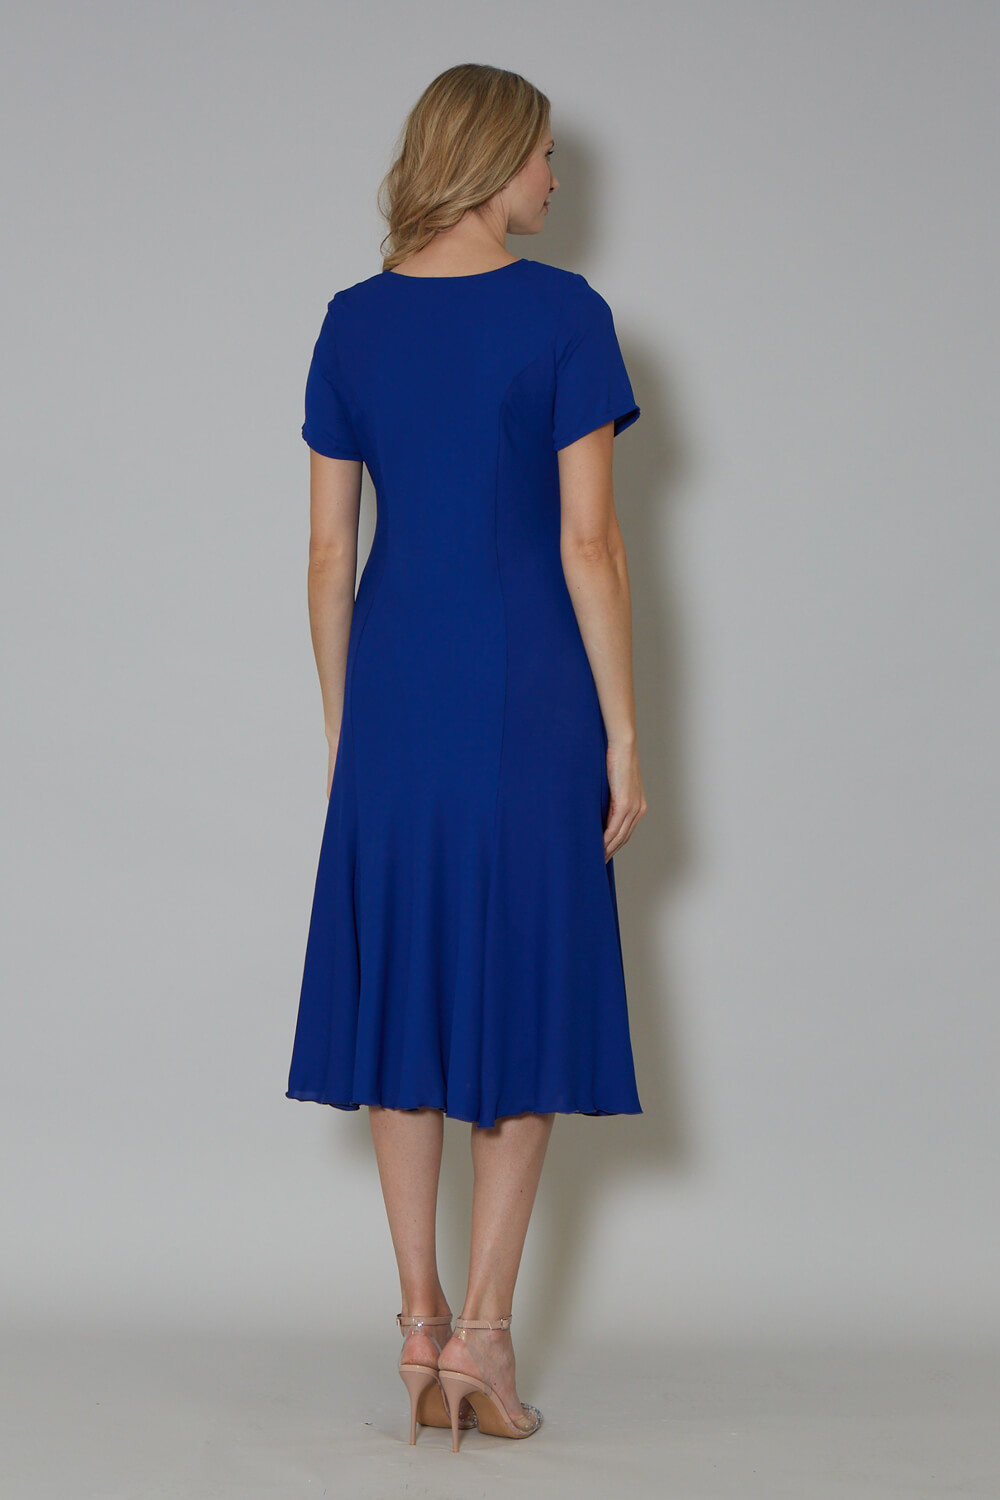 Royal Blue Julianna Georgette Fit and Flare Dress, Image 2 of 4